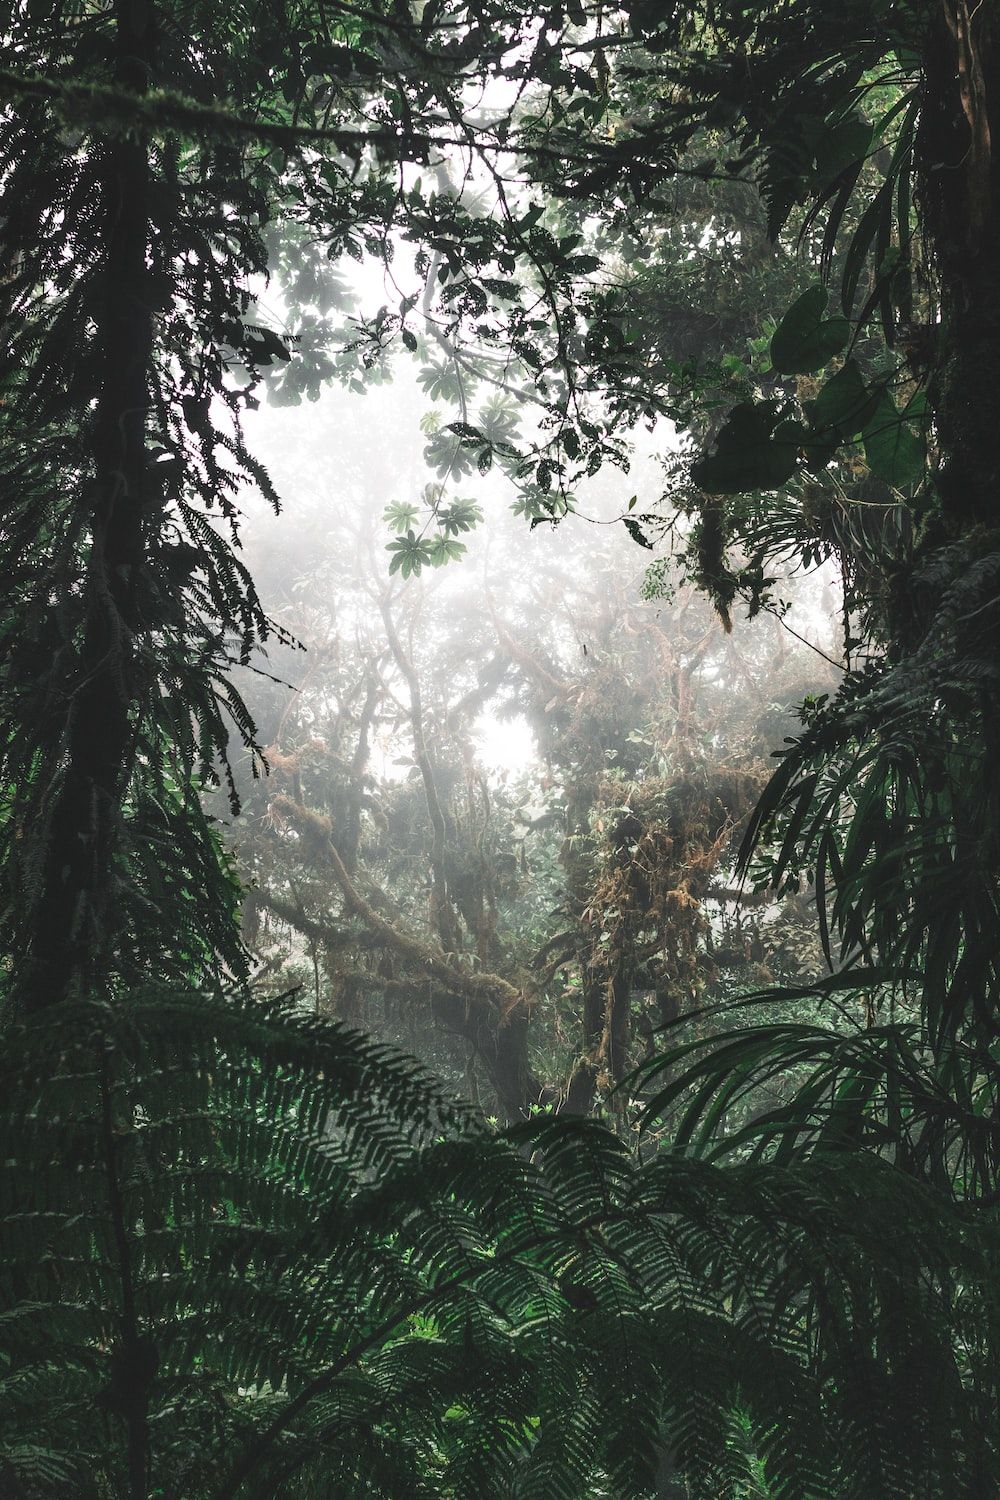 A dense forest with fog and green plants - Jungle